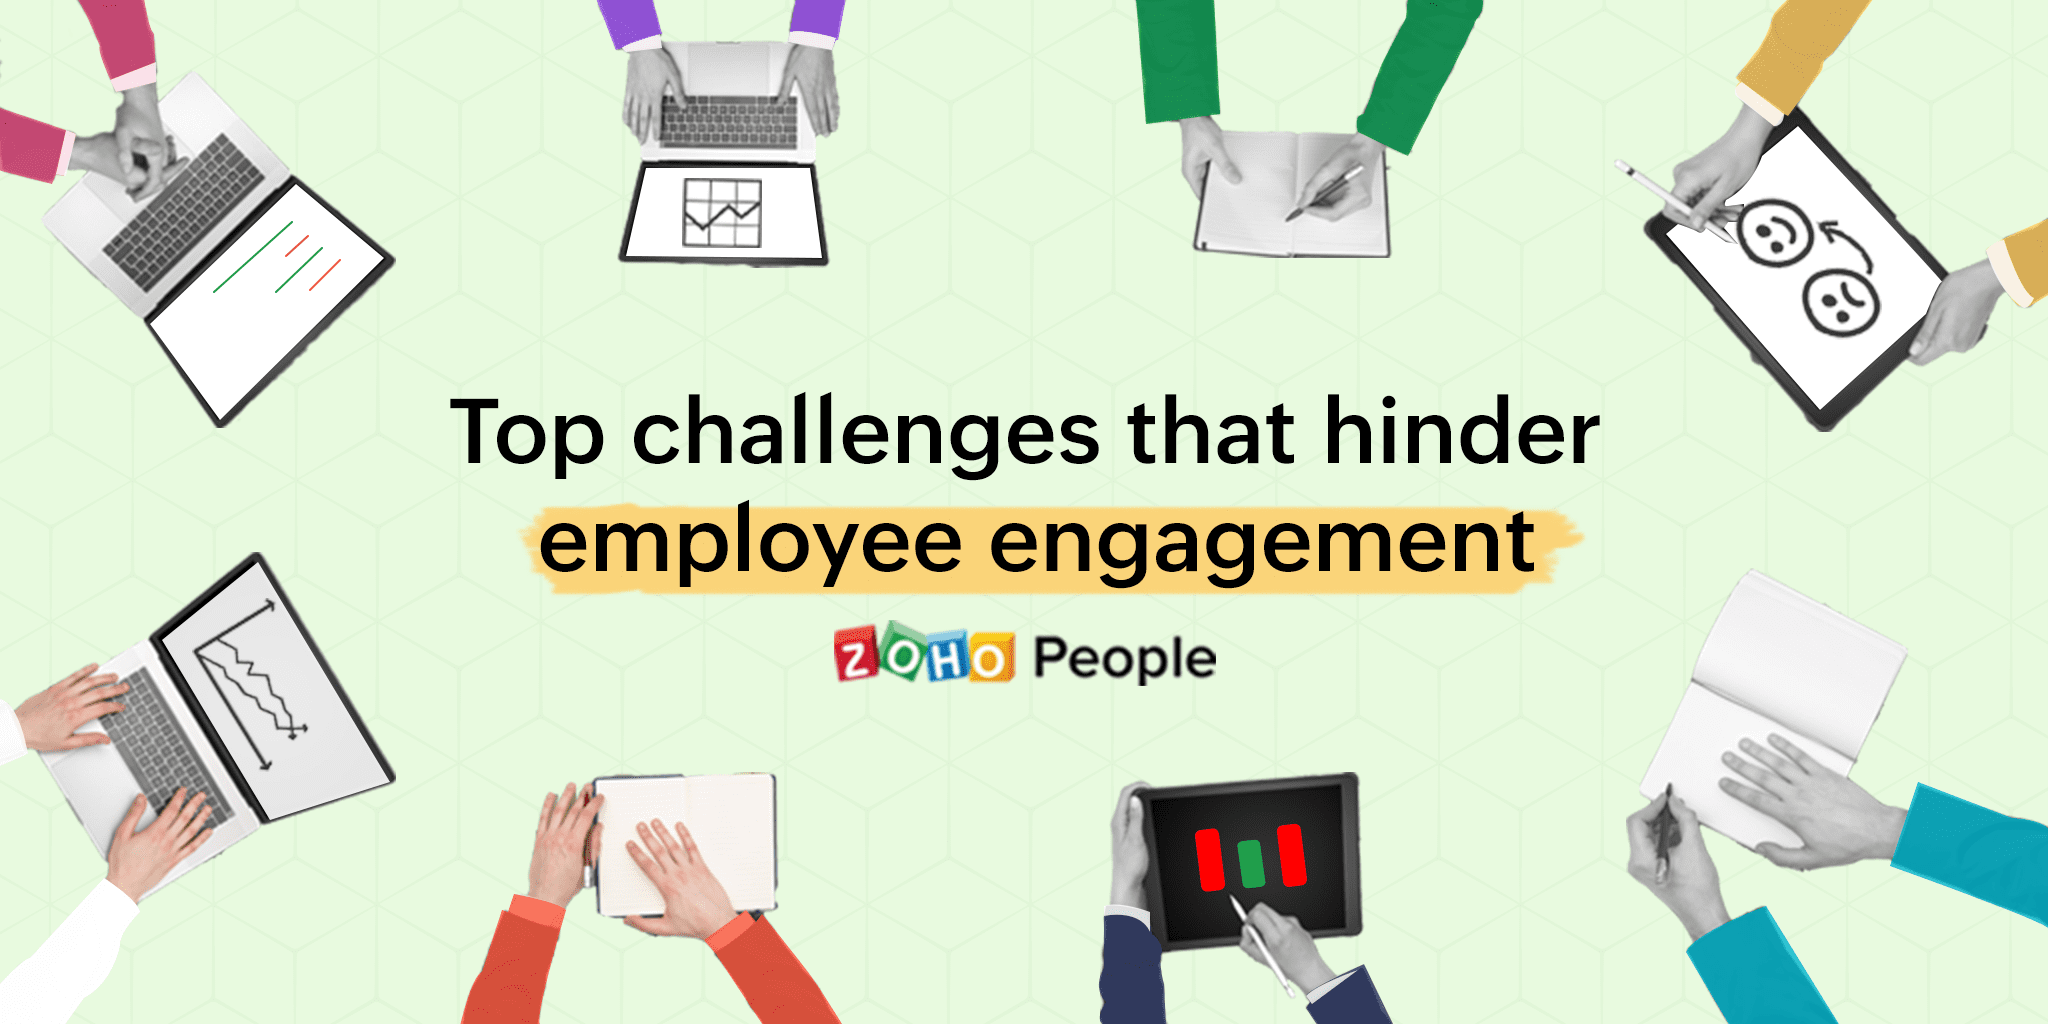 Top challenges that hinder employee engagement and tips to tackle them